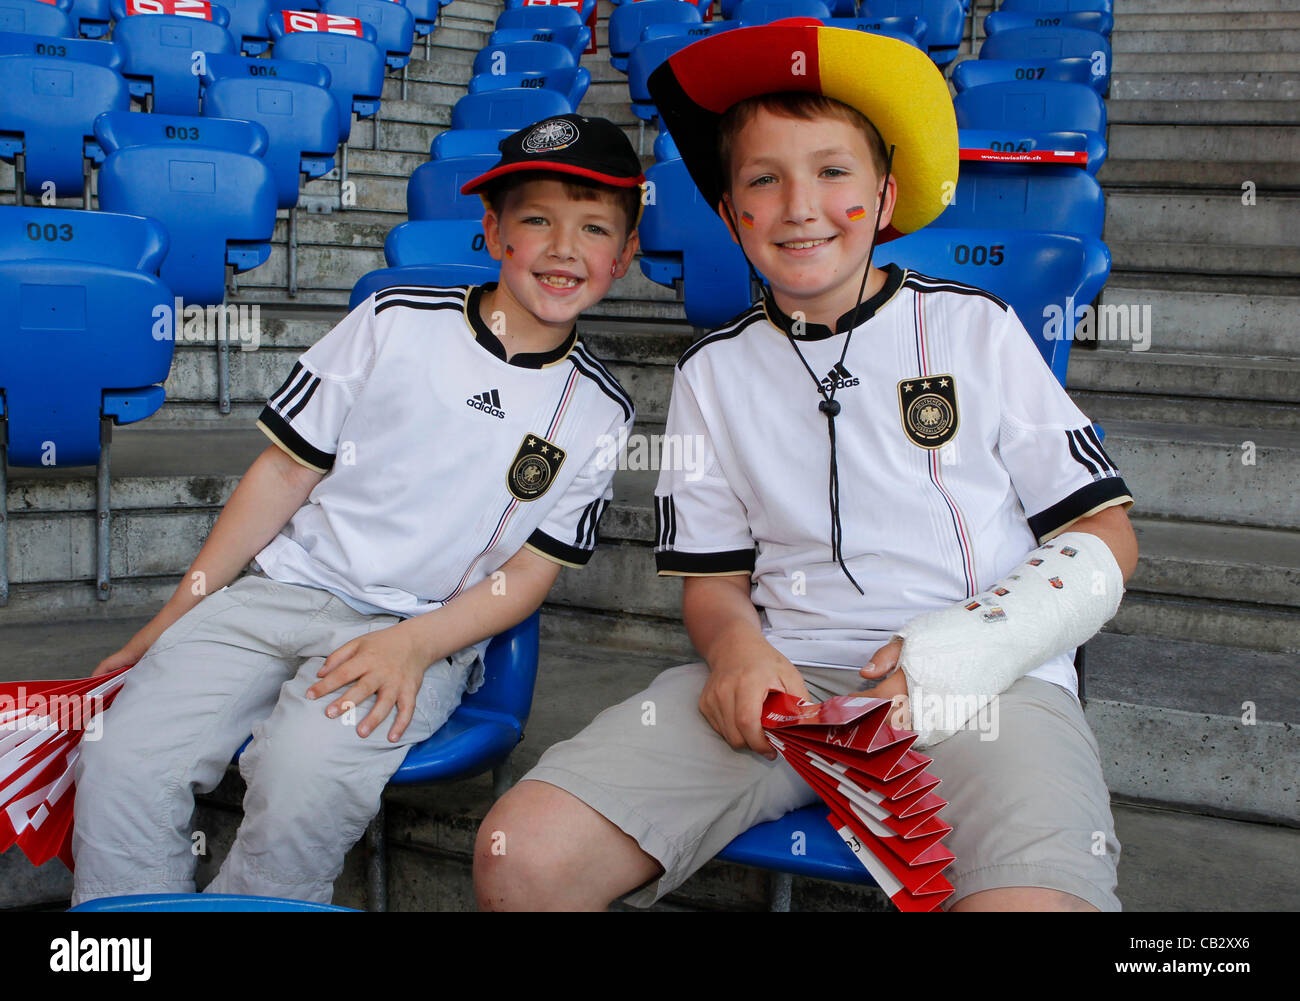 Fussball Deutschland Stadion Fans High Resolution Stock Photography and  Images - Alamy